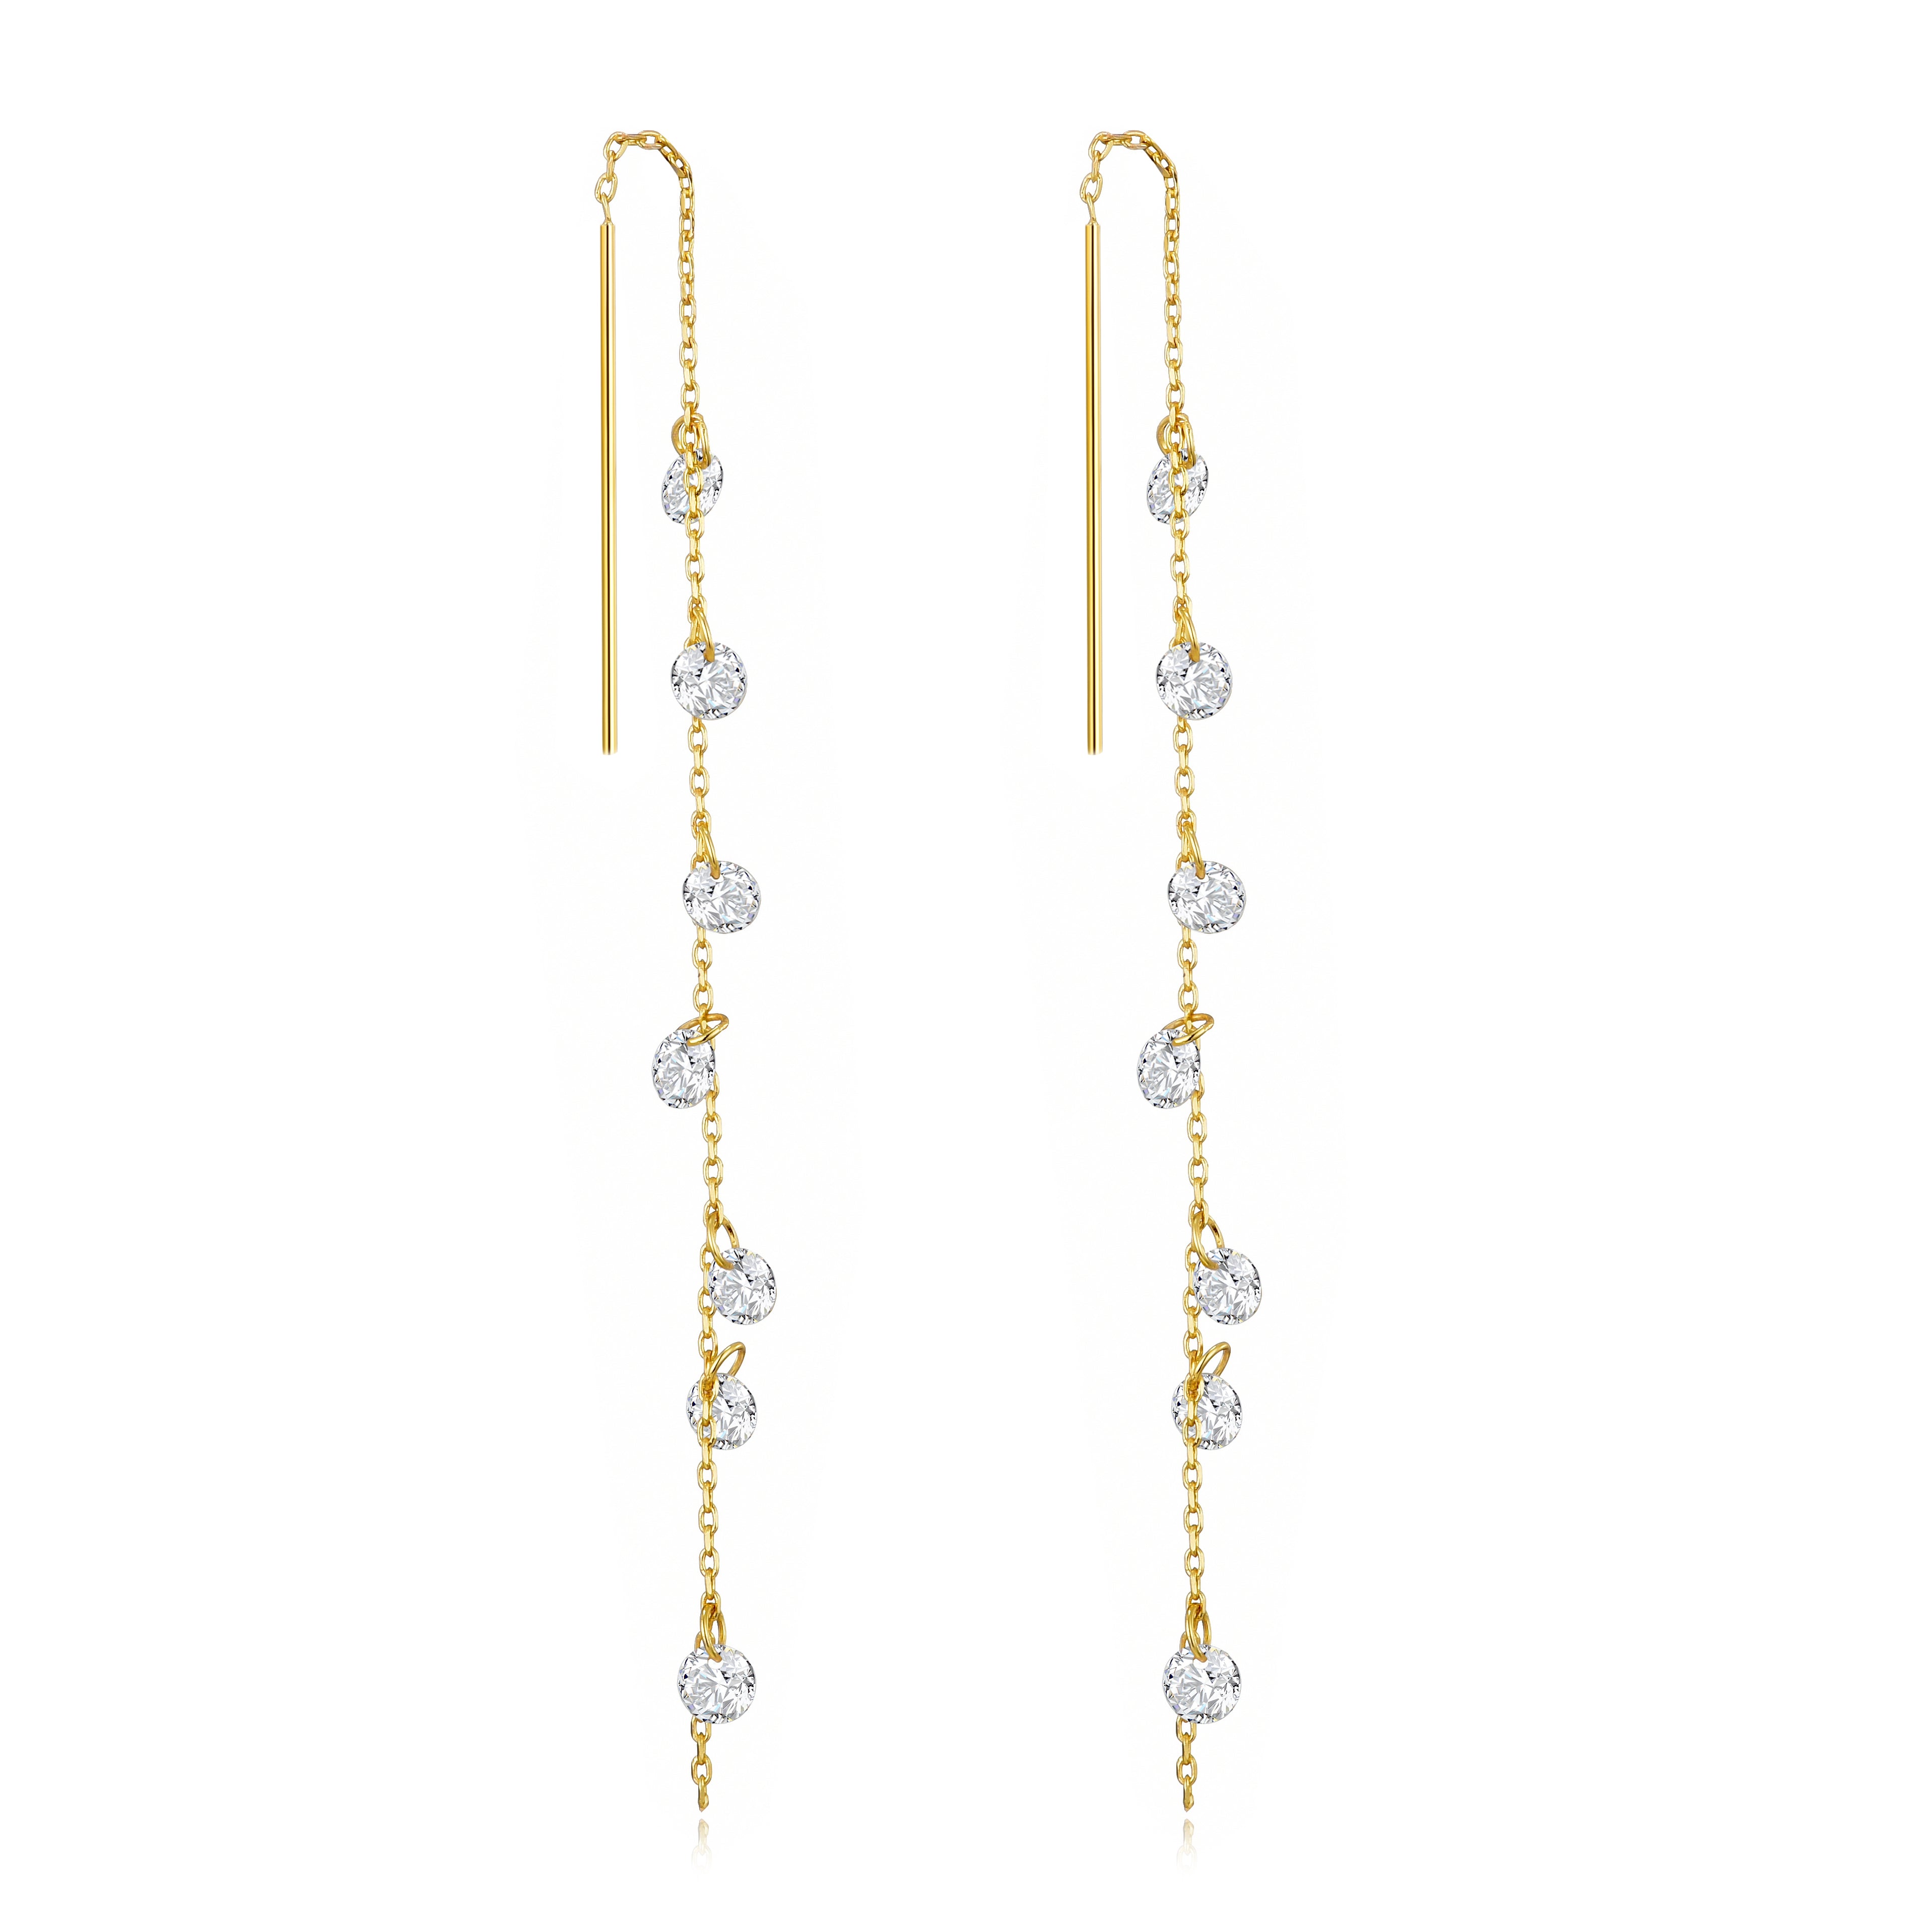 Gold Plated Dangle Thread Earrings Created with Zircondia® Crystals by Philip Jones Jewellery